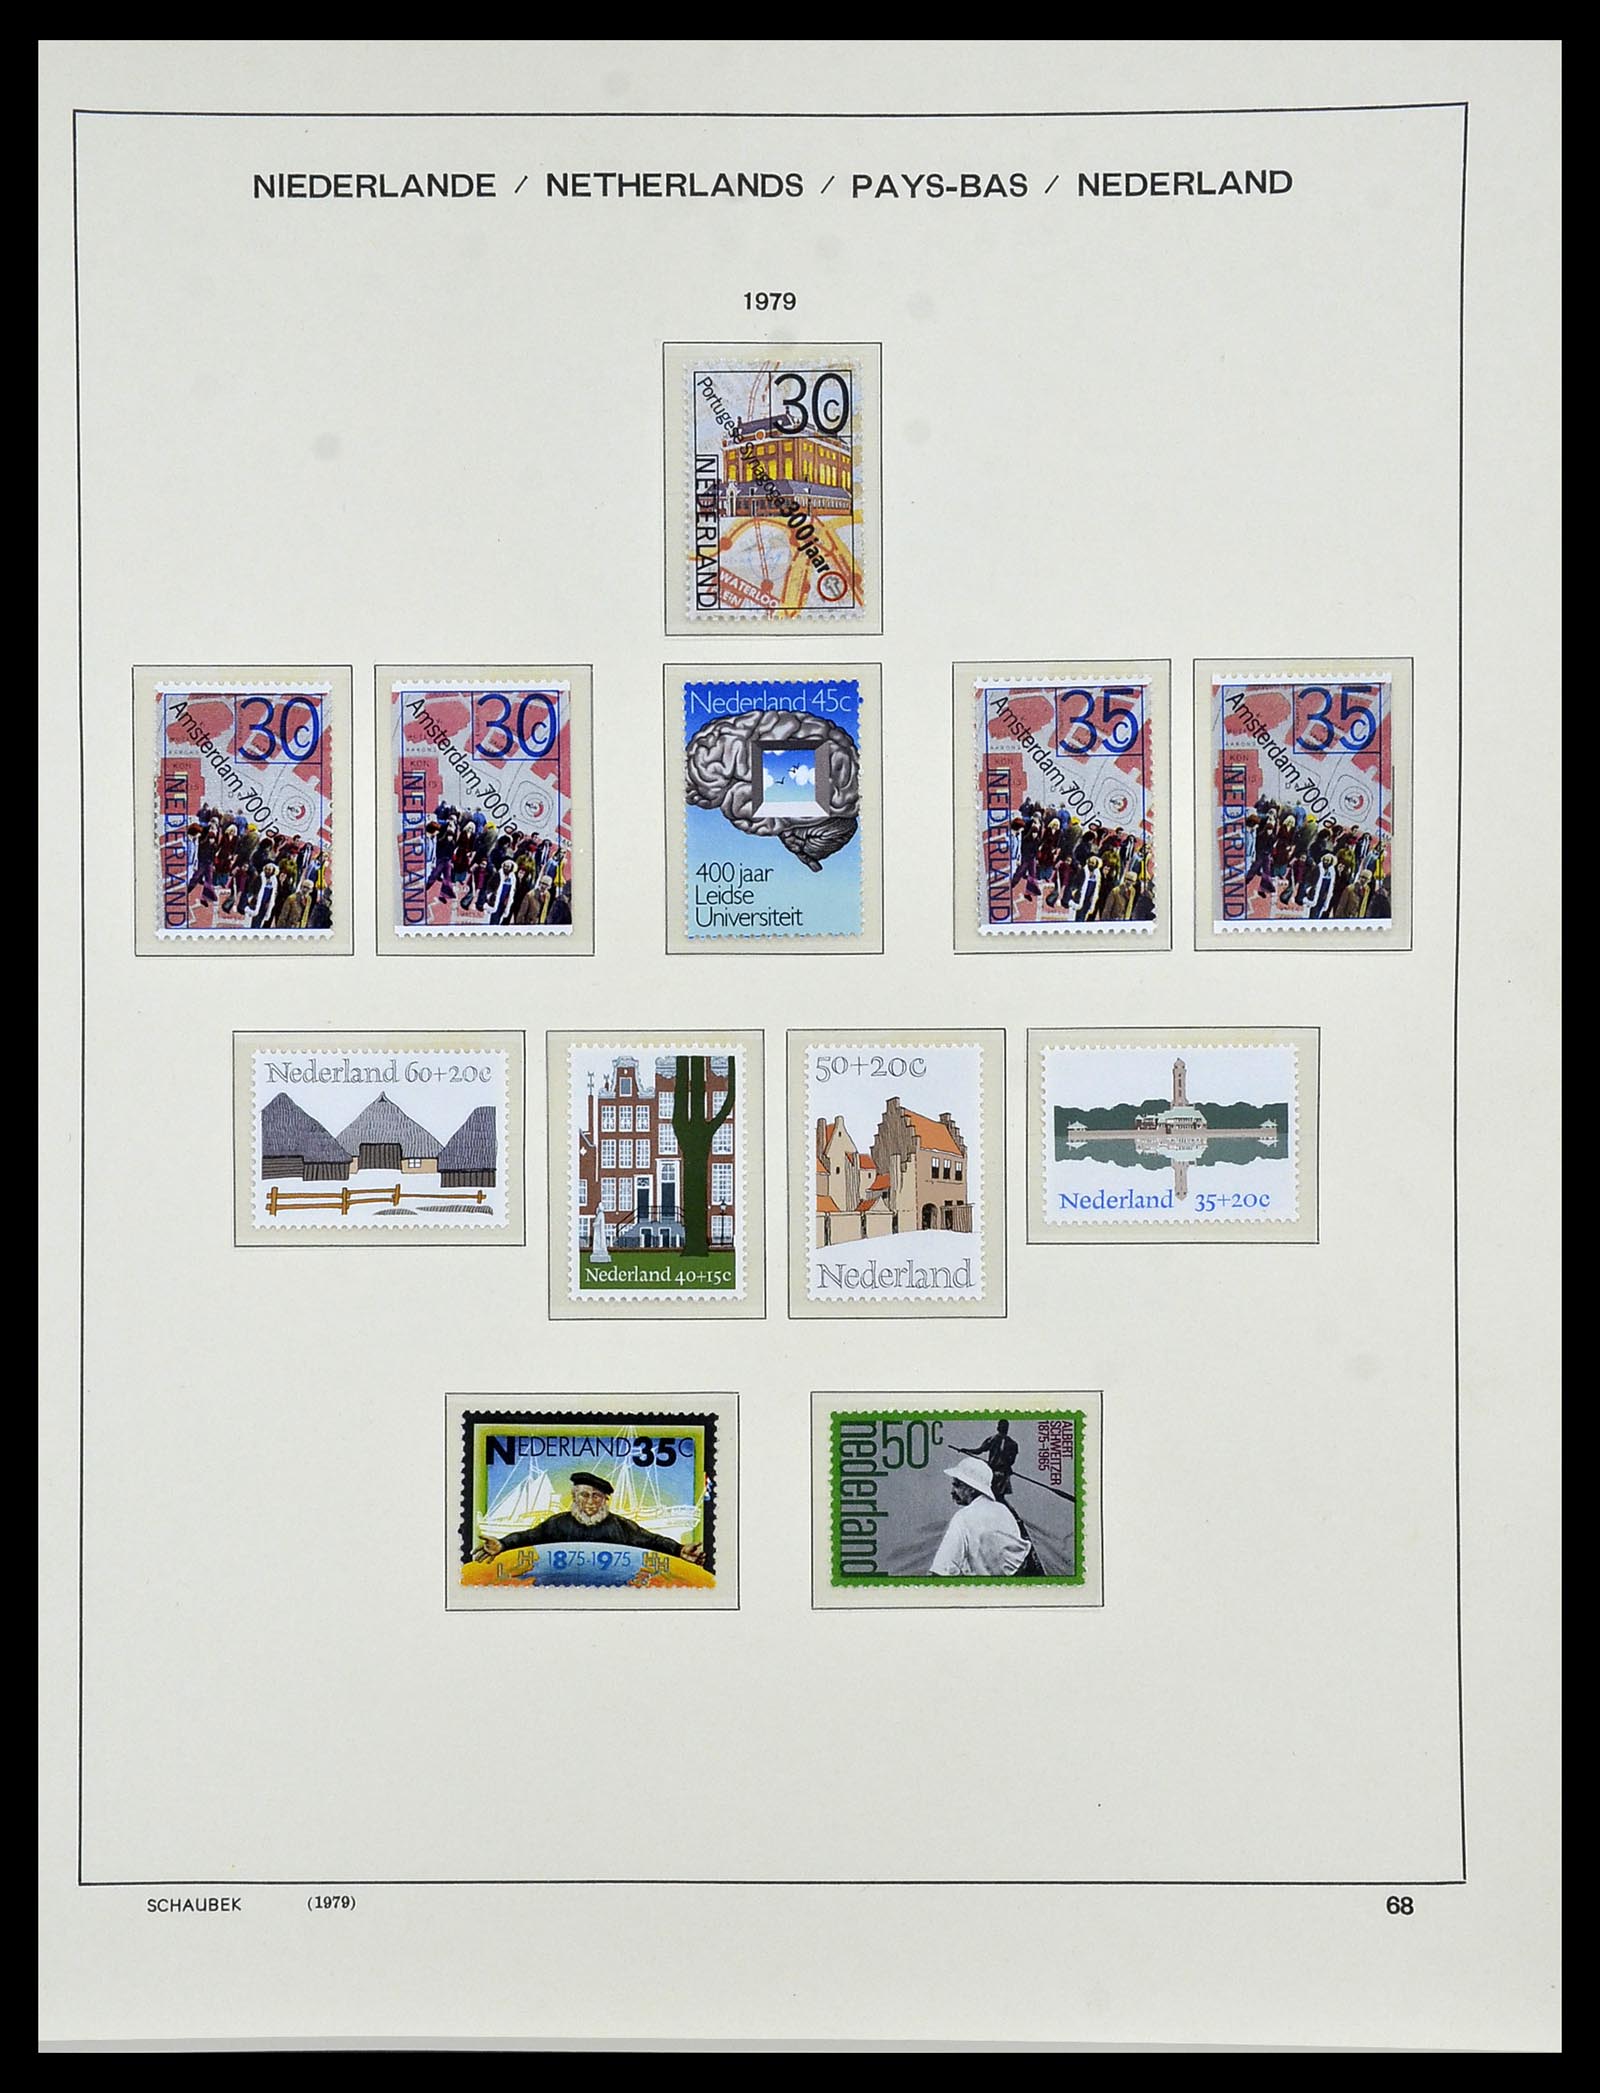 34040 072 - Stamp collection 34040 Netherlands 1852-1992.